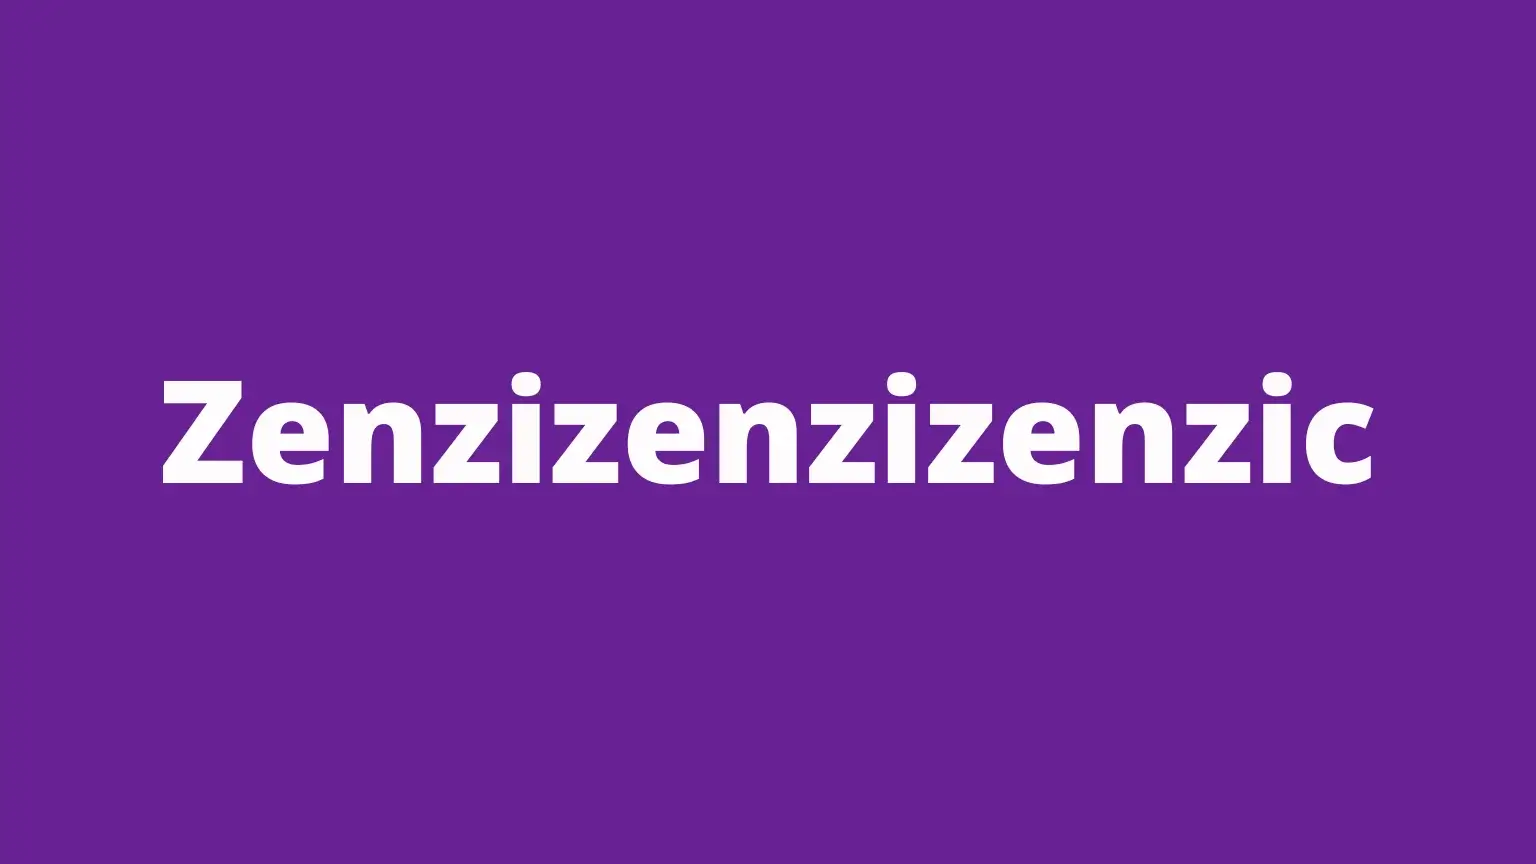 The word zenzizenzizenzic and meaning in English